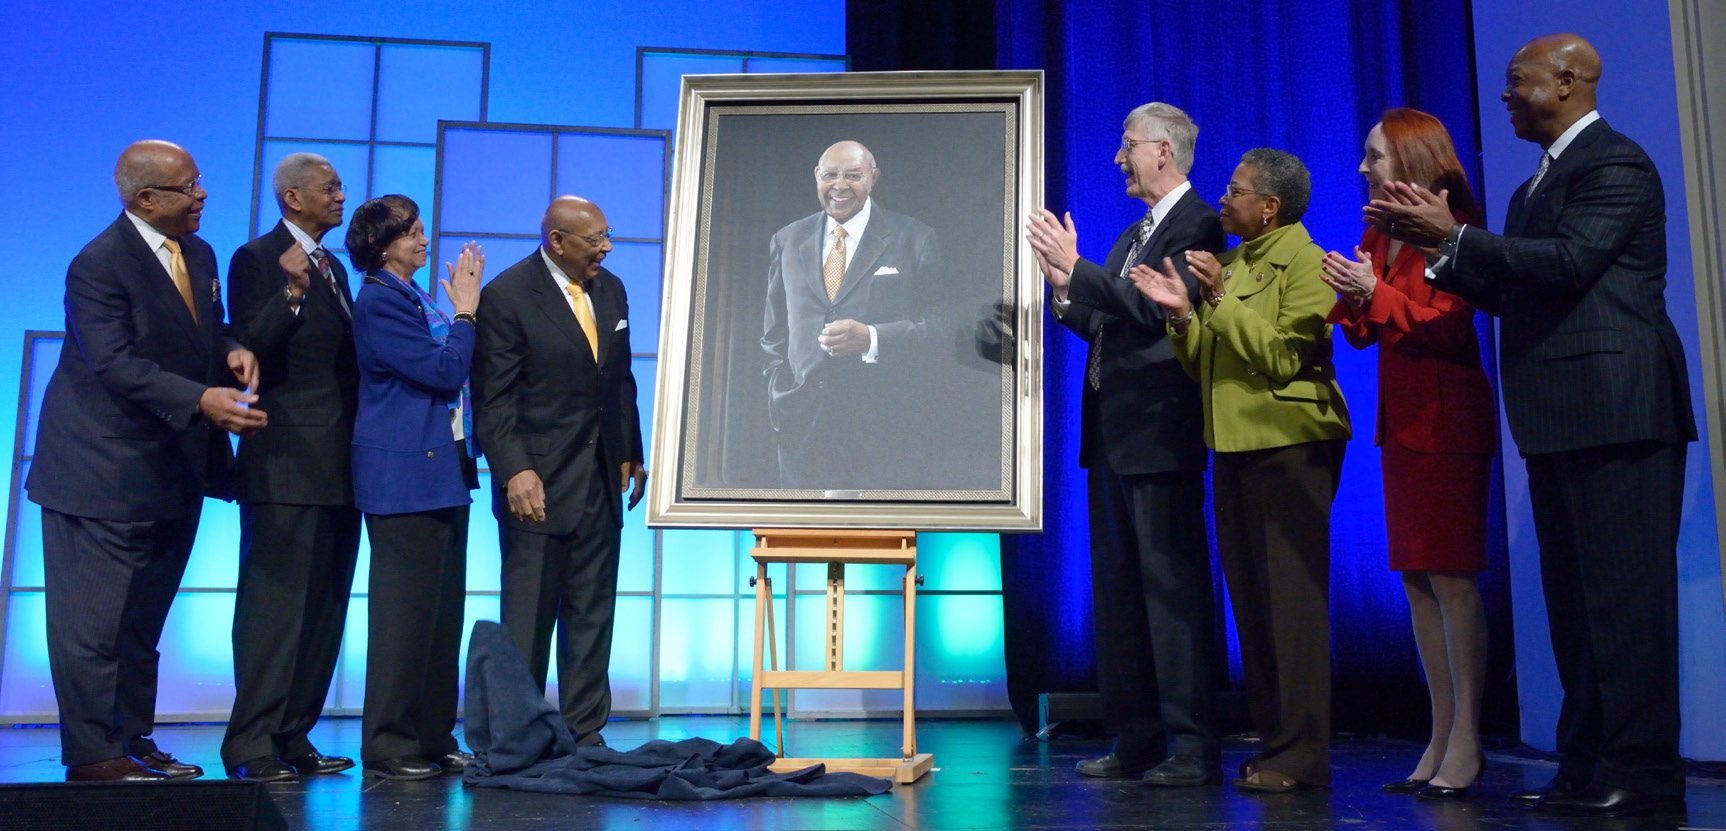 A portrait honoring former Rep. Louis Stokes is unveiled at the summit.